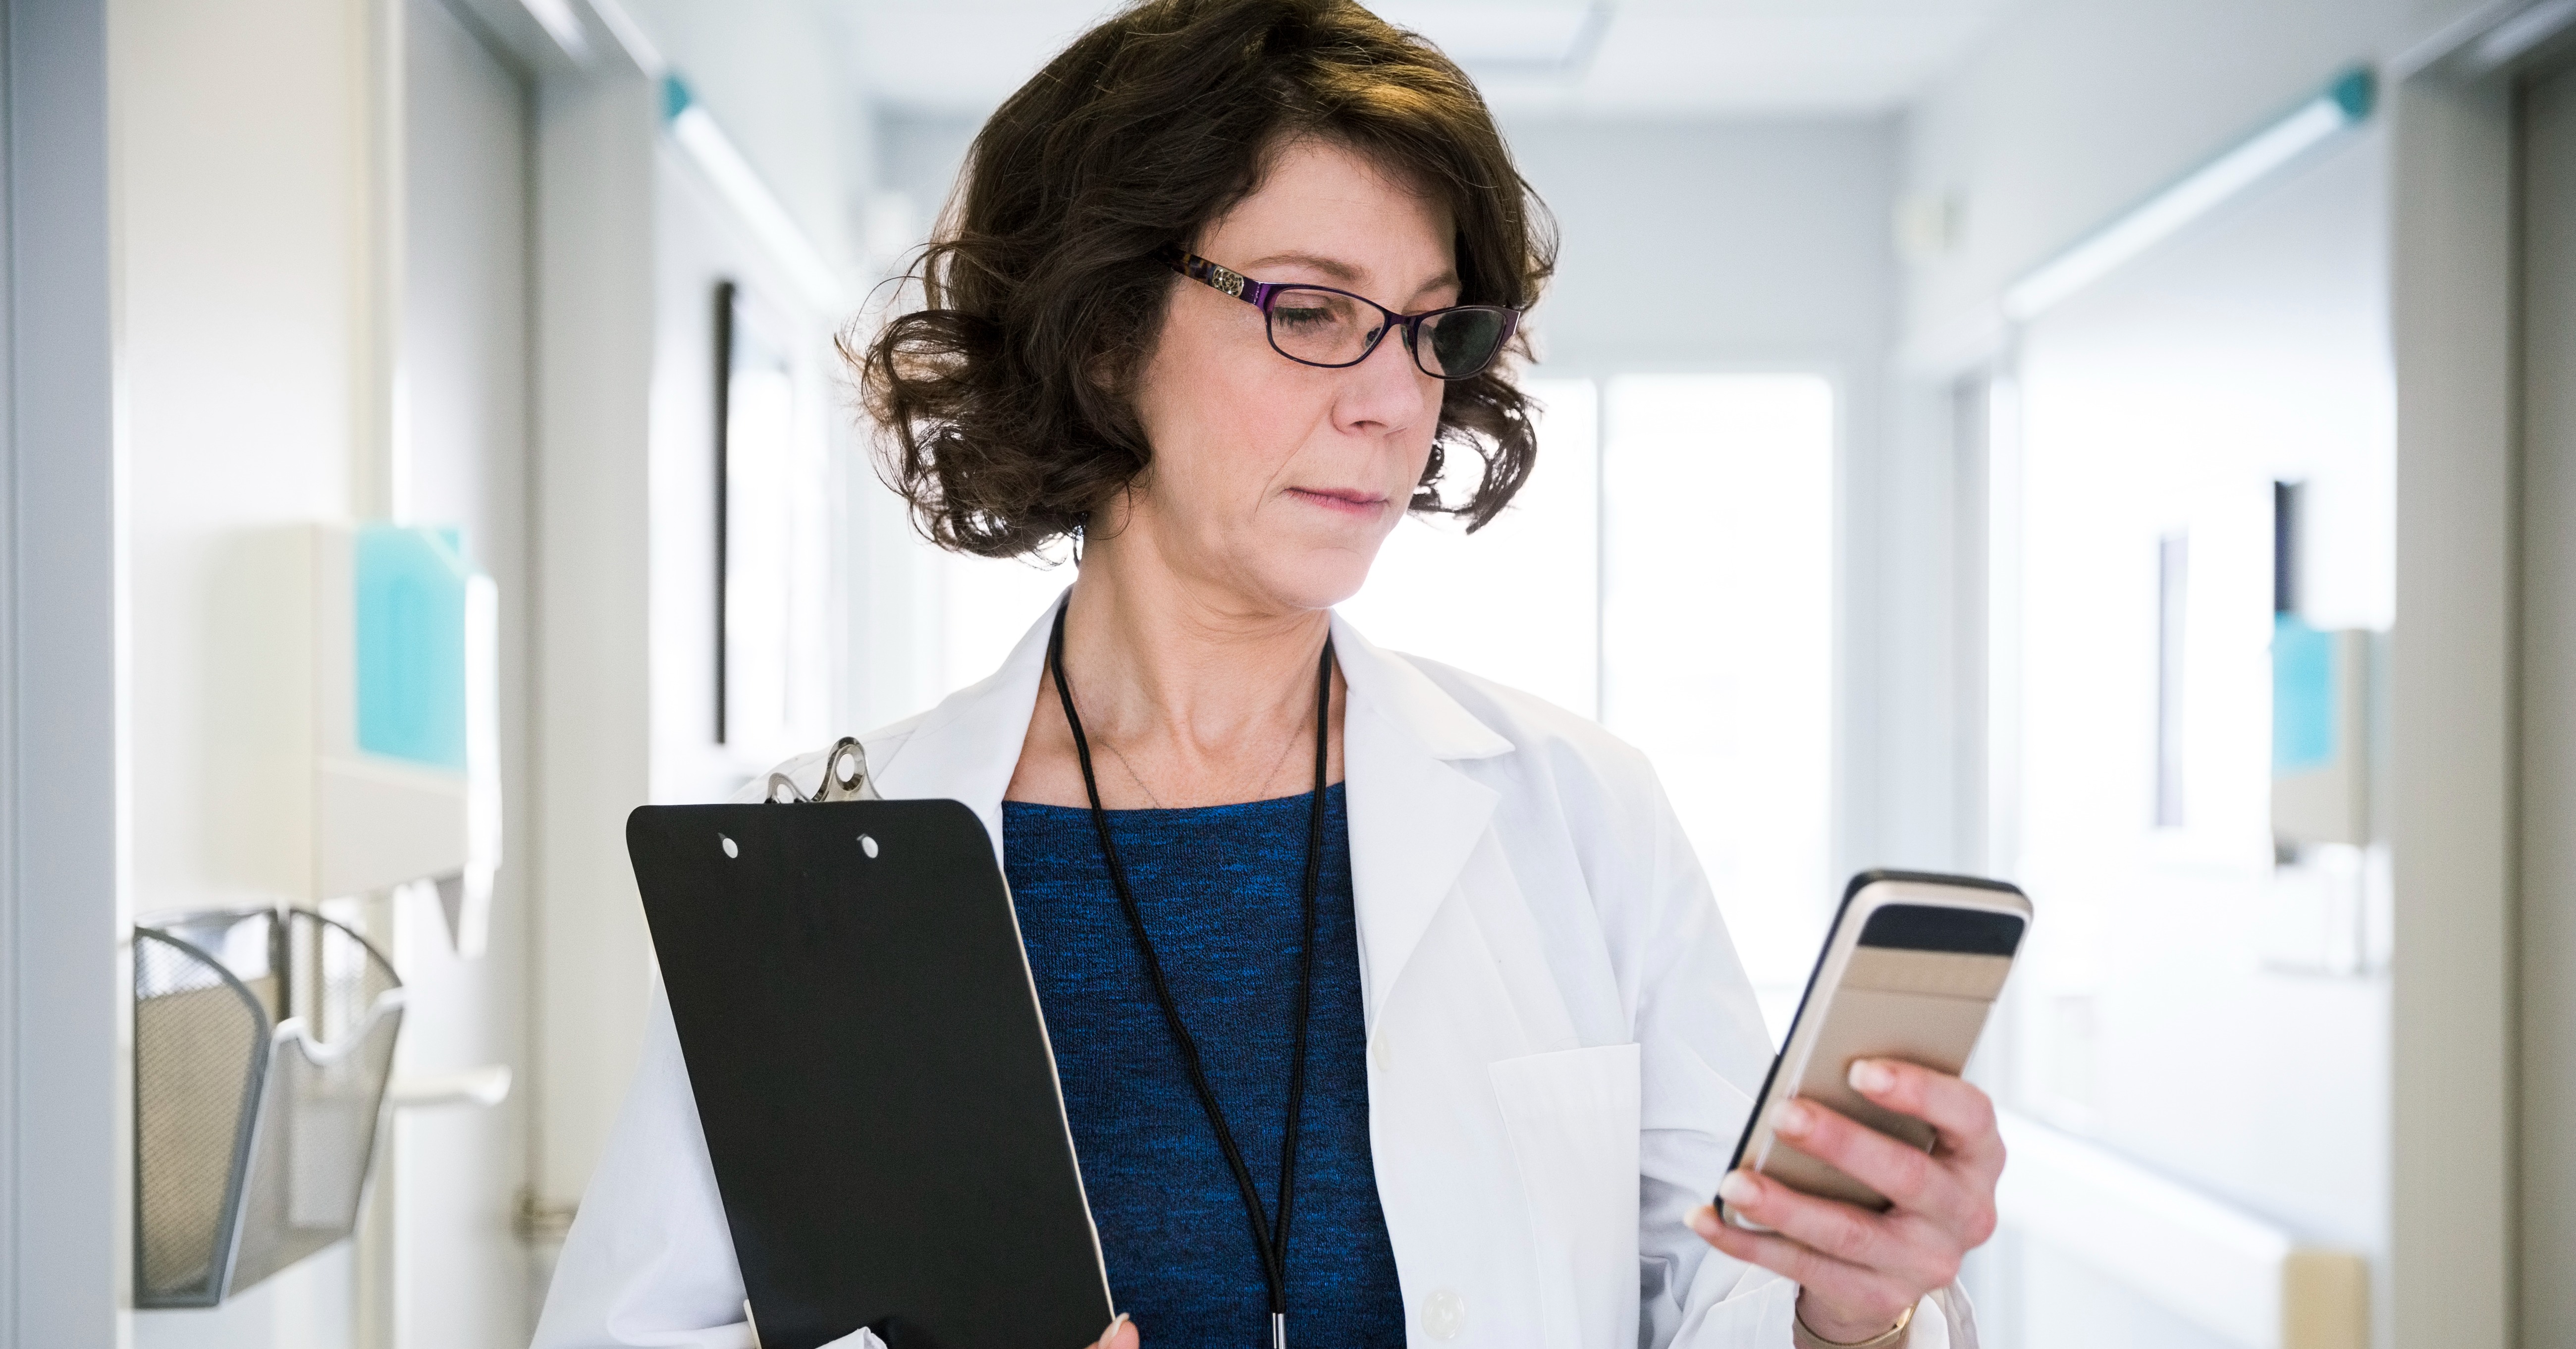 Physician looks down at her smartphone while holding a clipboard